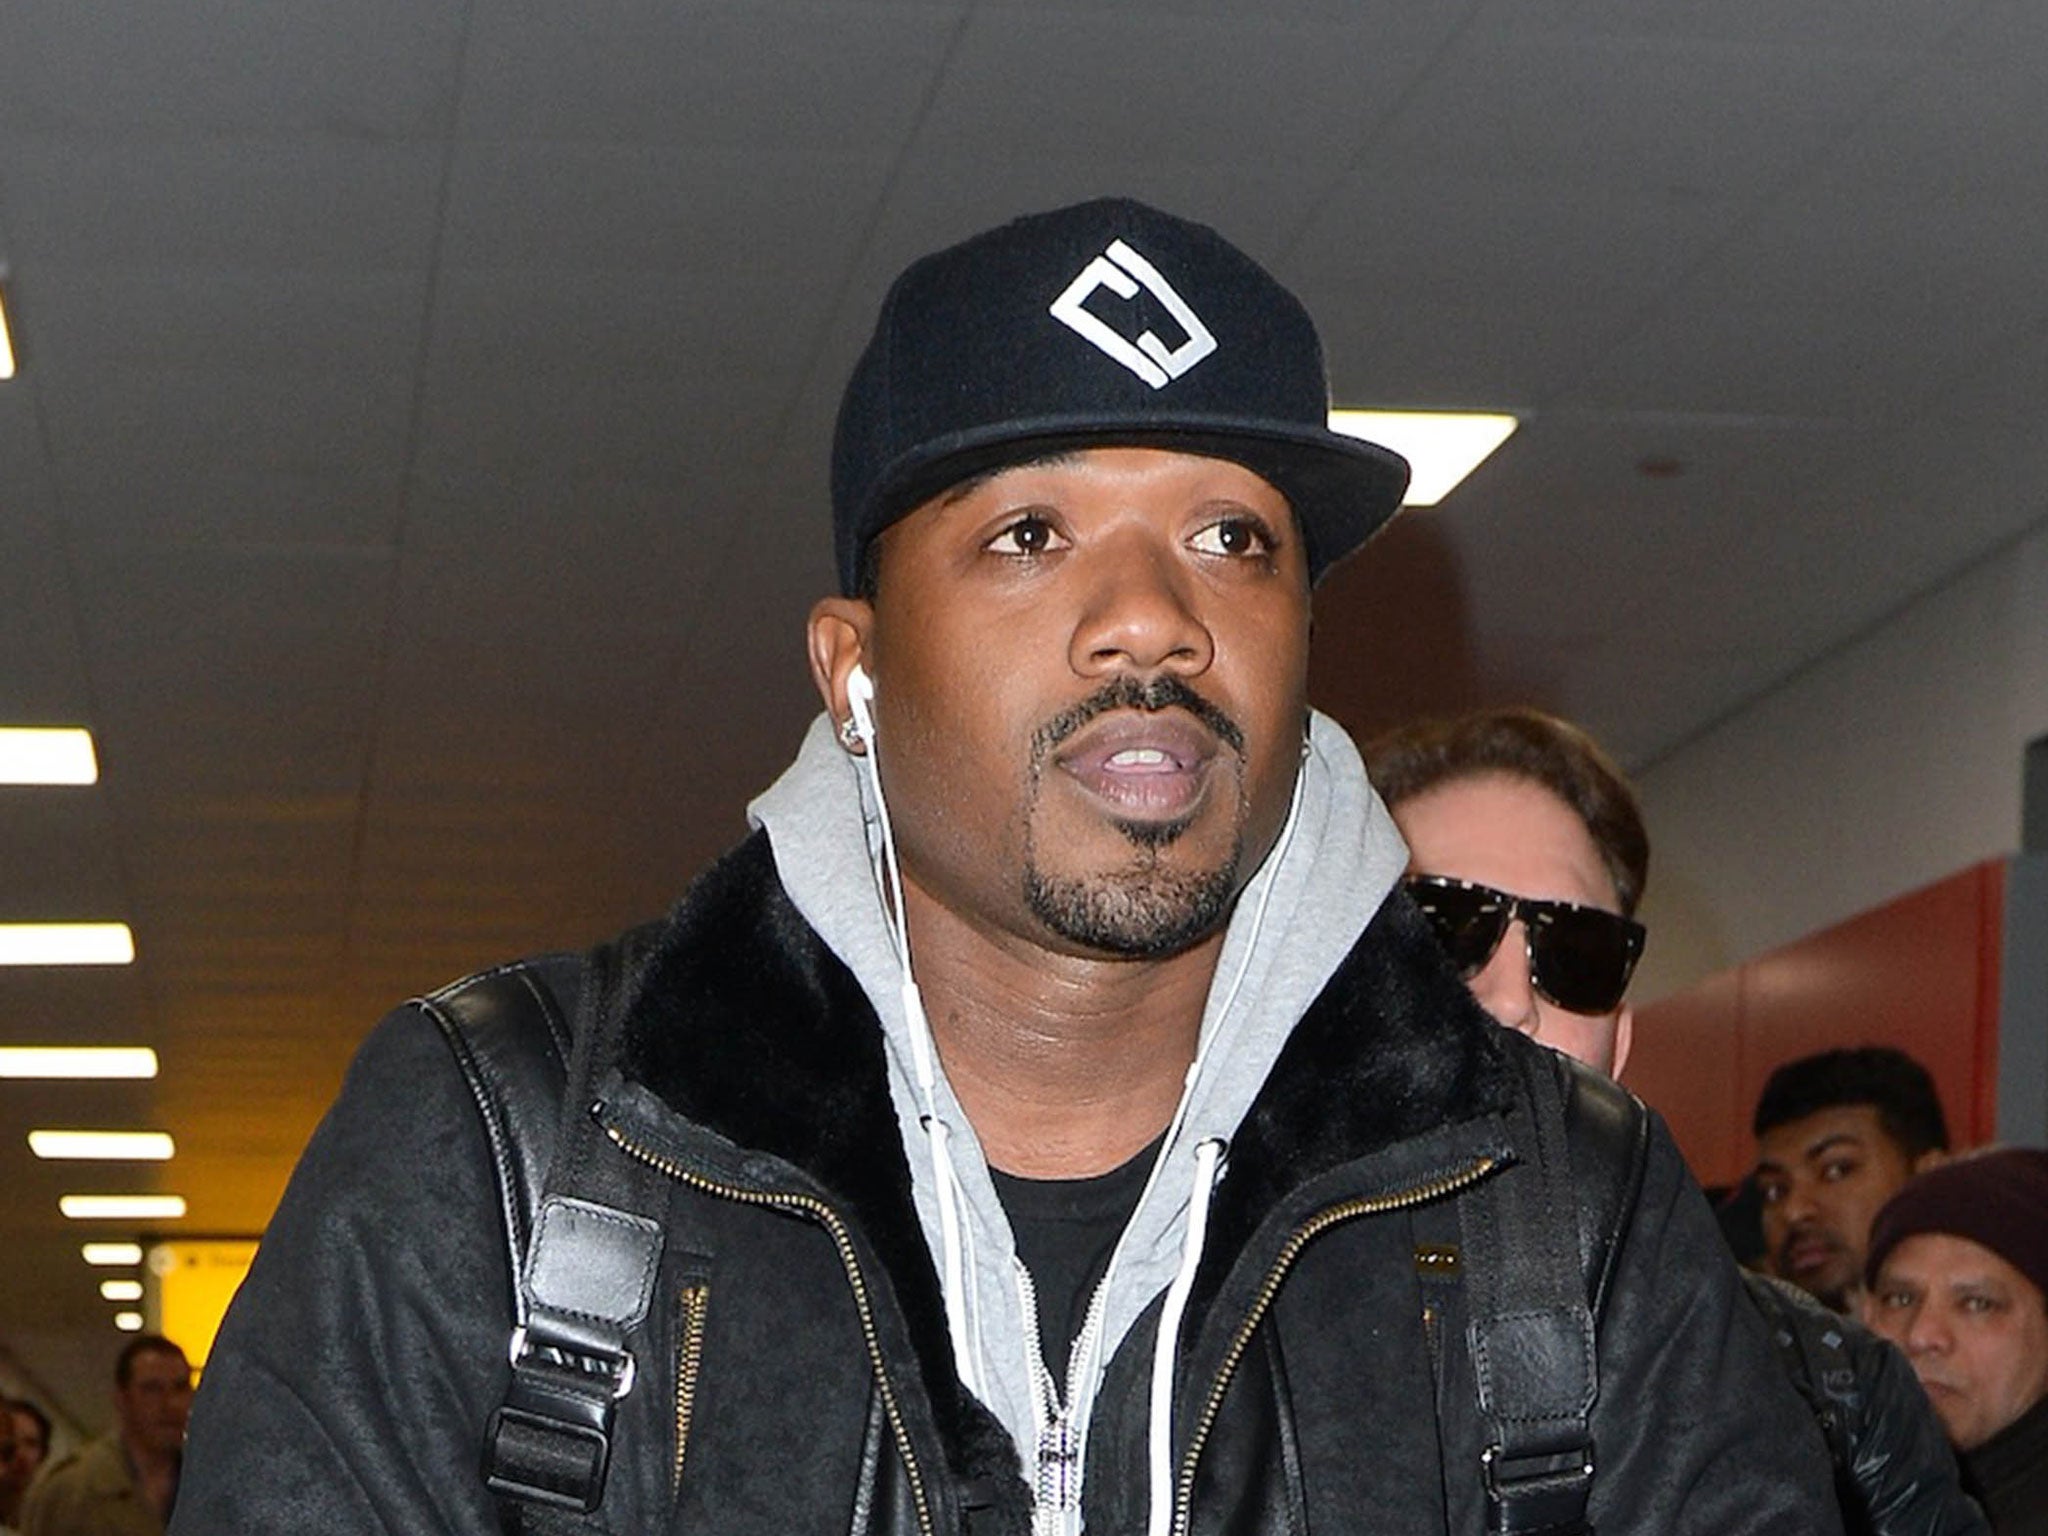 Ray J, whose real name is William Ray Norwood, pictured at JFK airport in March, 2014